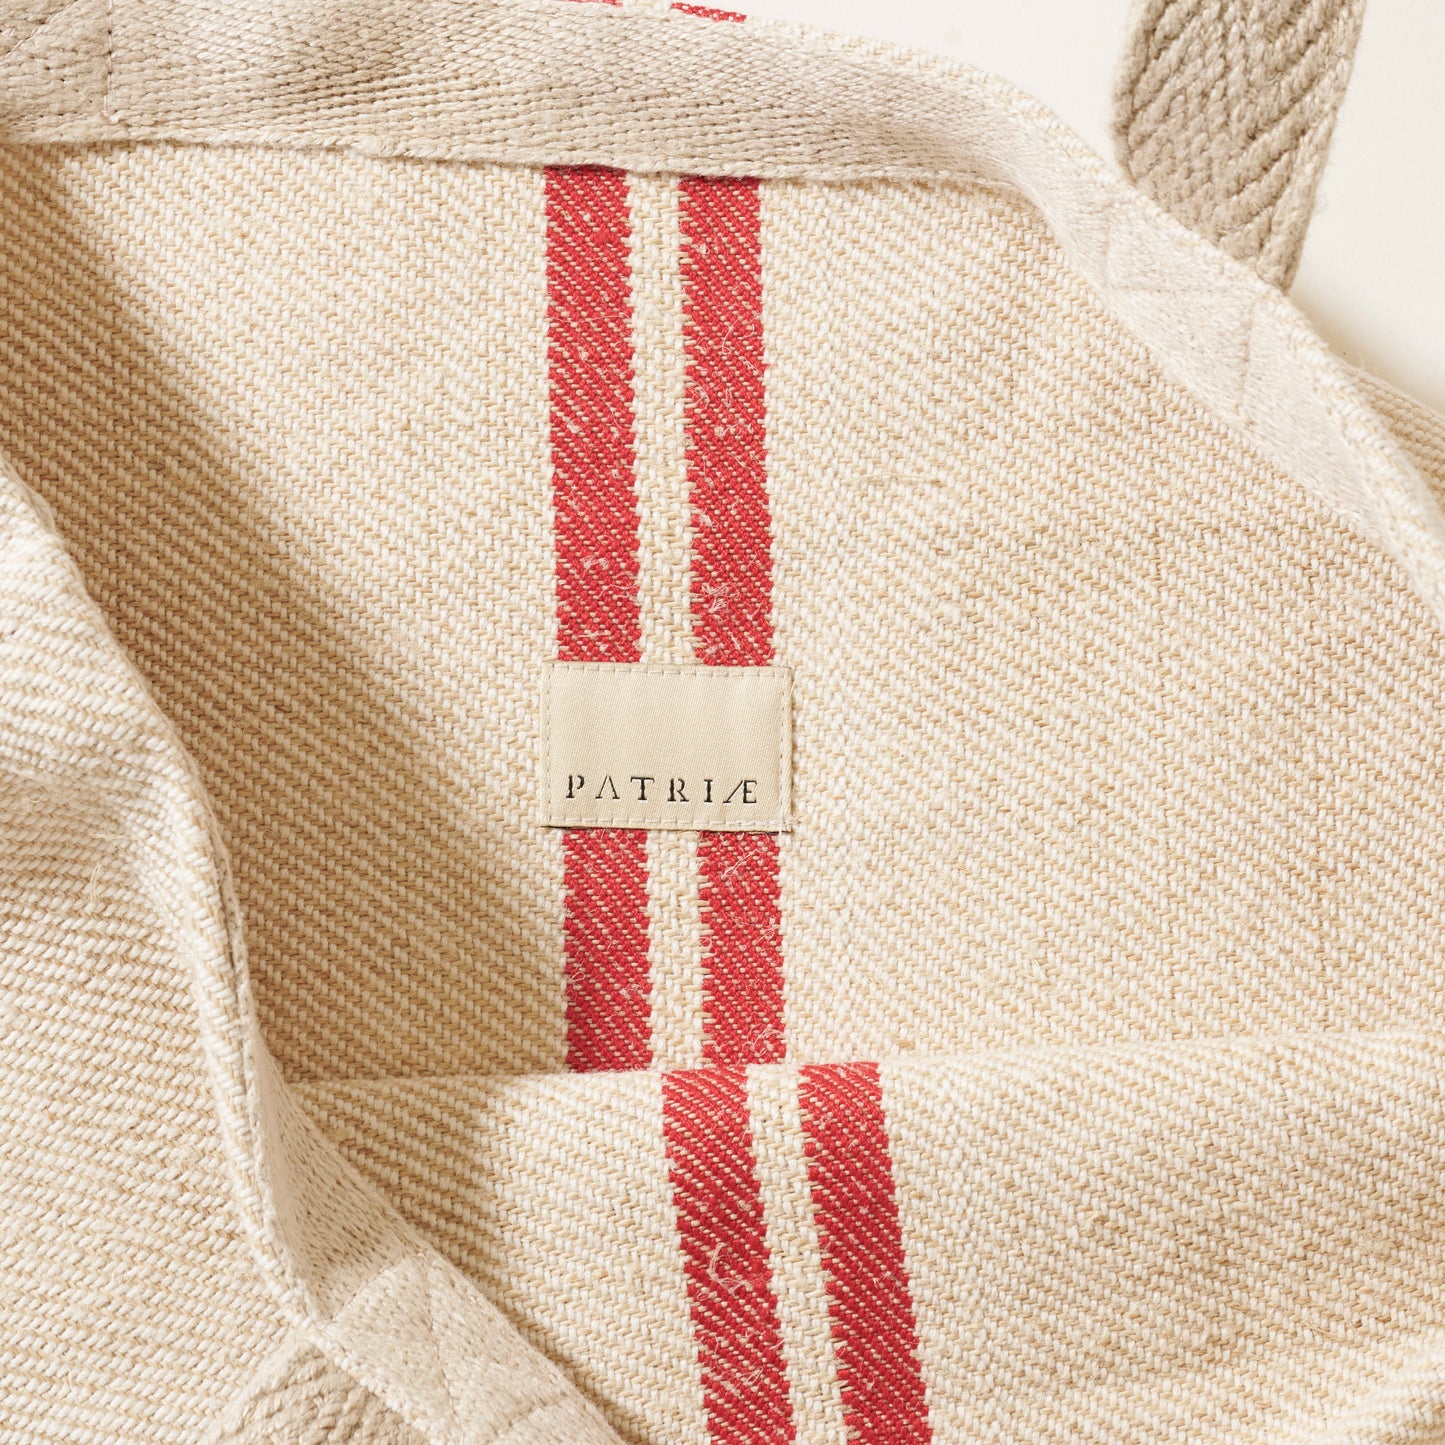 Large Patriae Tote with Red Stripes